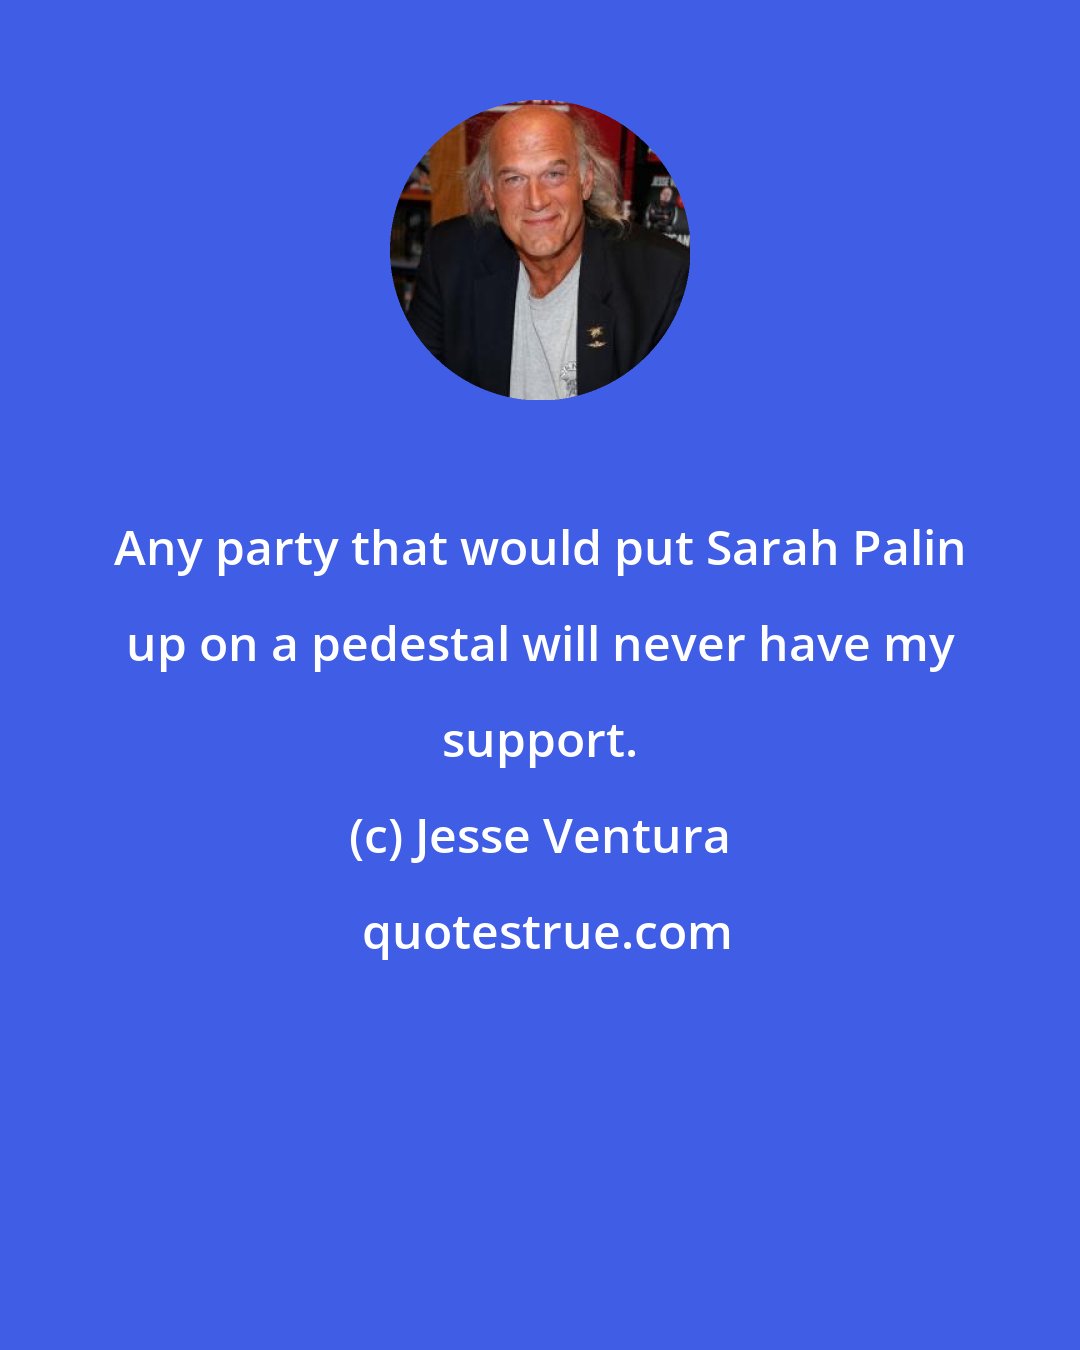 Jesse Ventura: Any party that would put Sarah Palin up on a pedestal will never have my support.